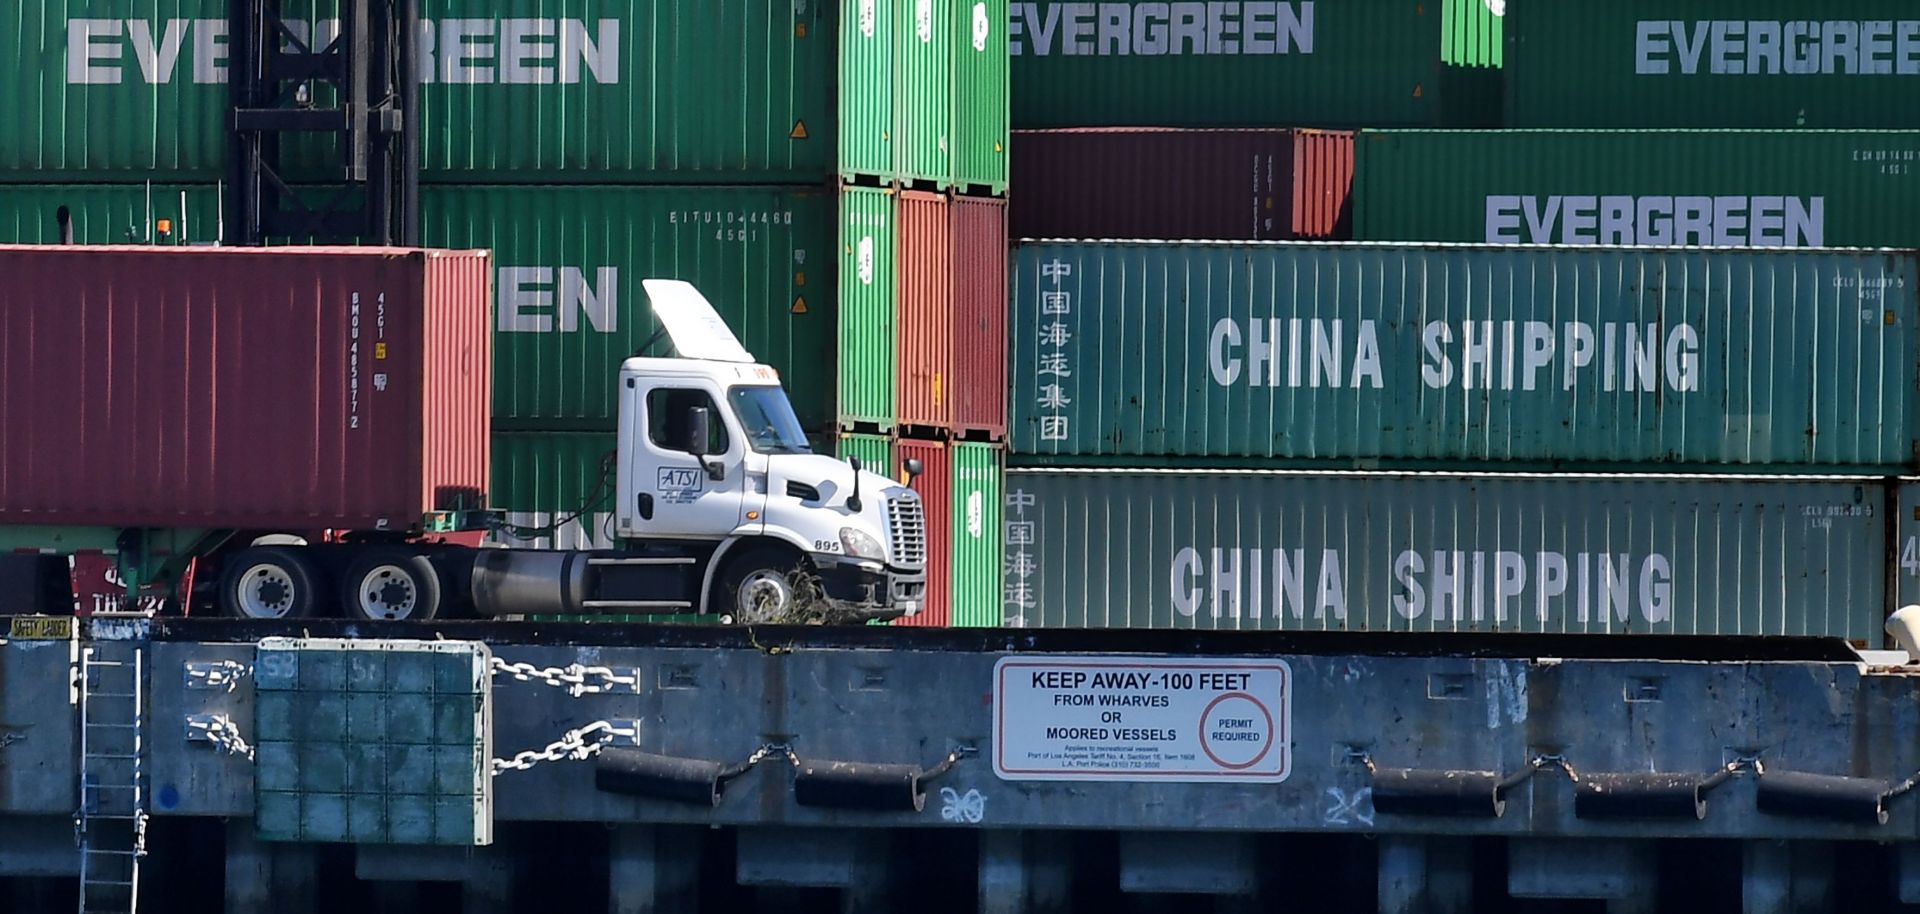 Dock workers unload shipping containers with goods imported from China and elsewhere at the Port of Long Beach in Los Angeles.